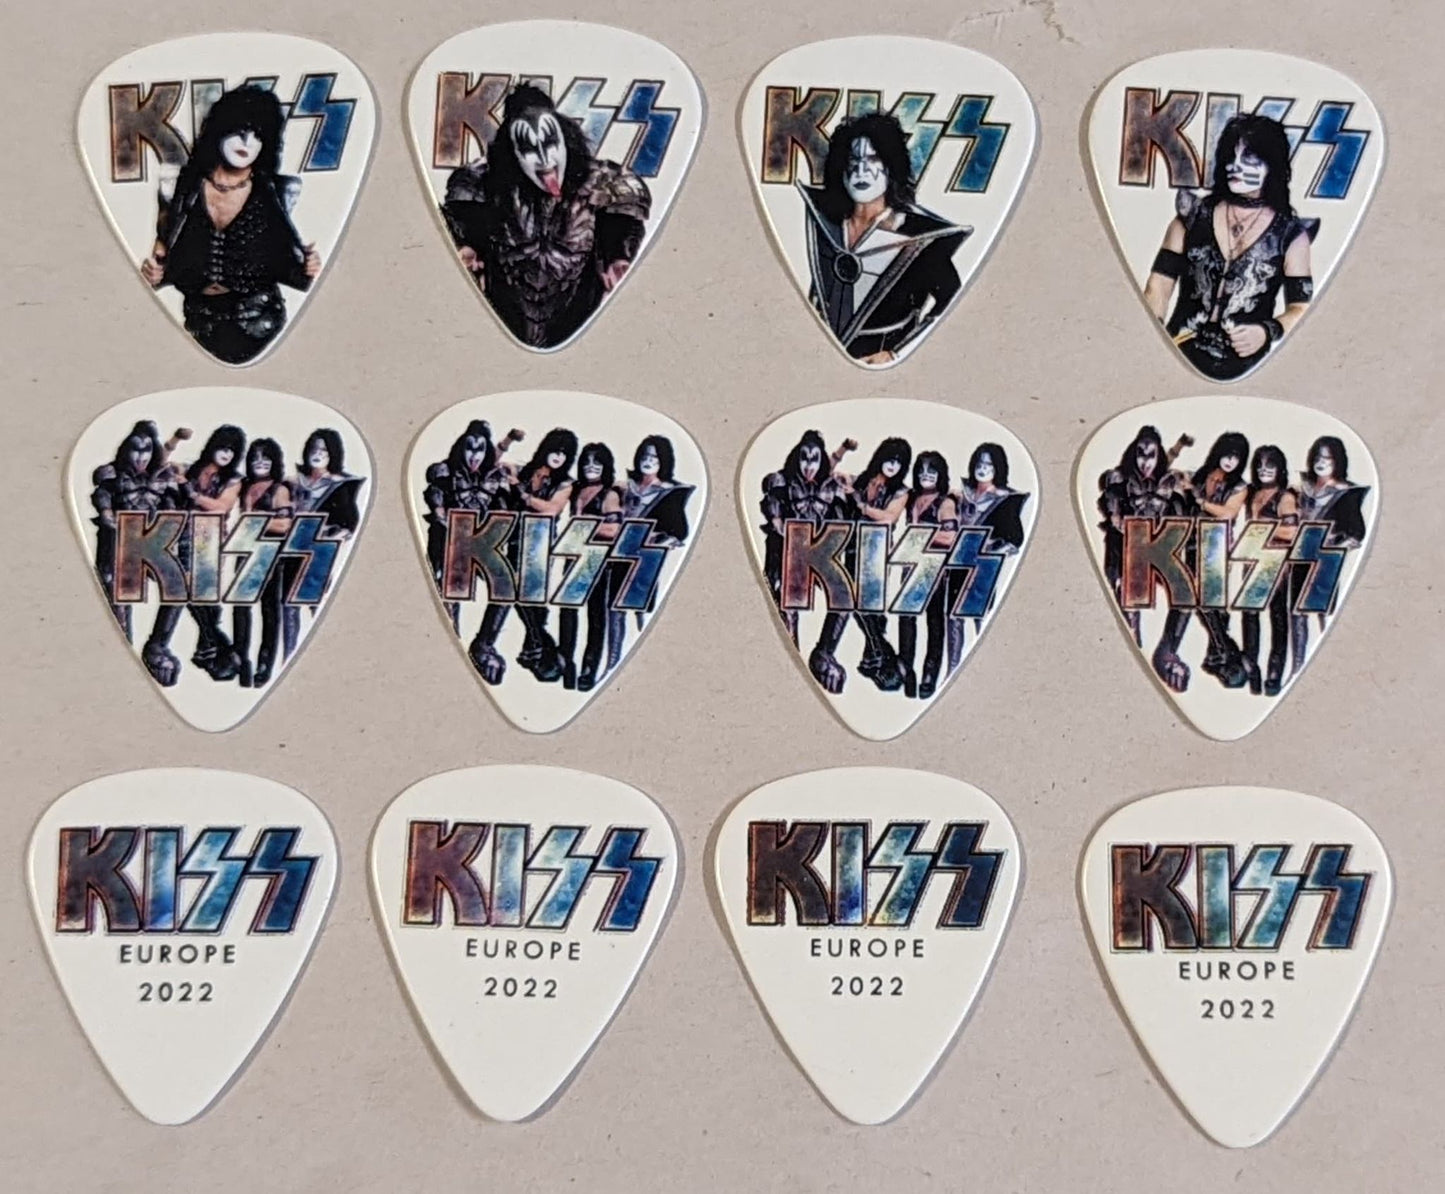 KISS 2022 End of the Road EUROPE Tour Set of 12 Guitar Picks